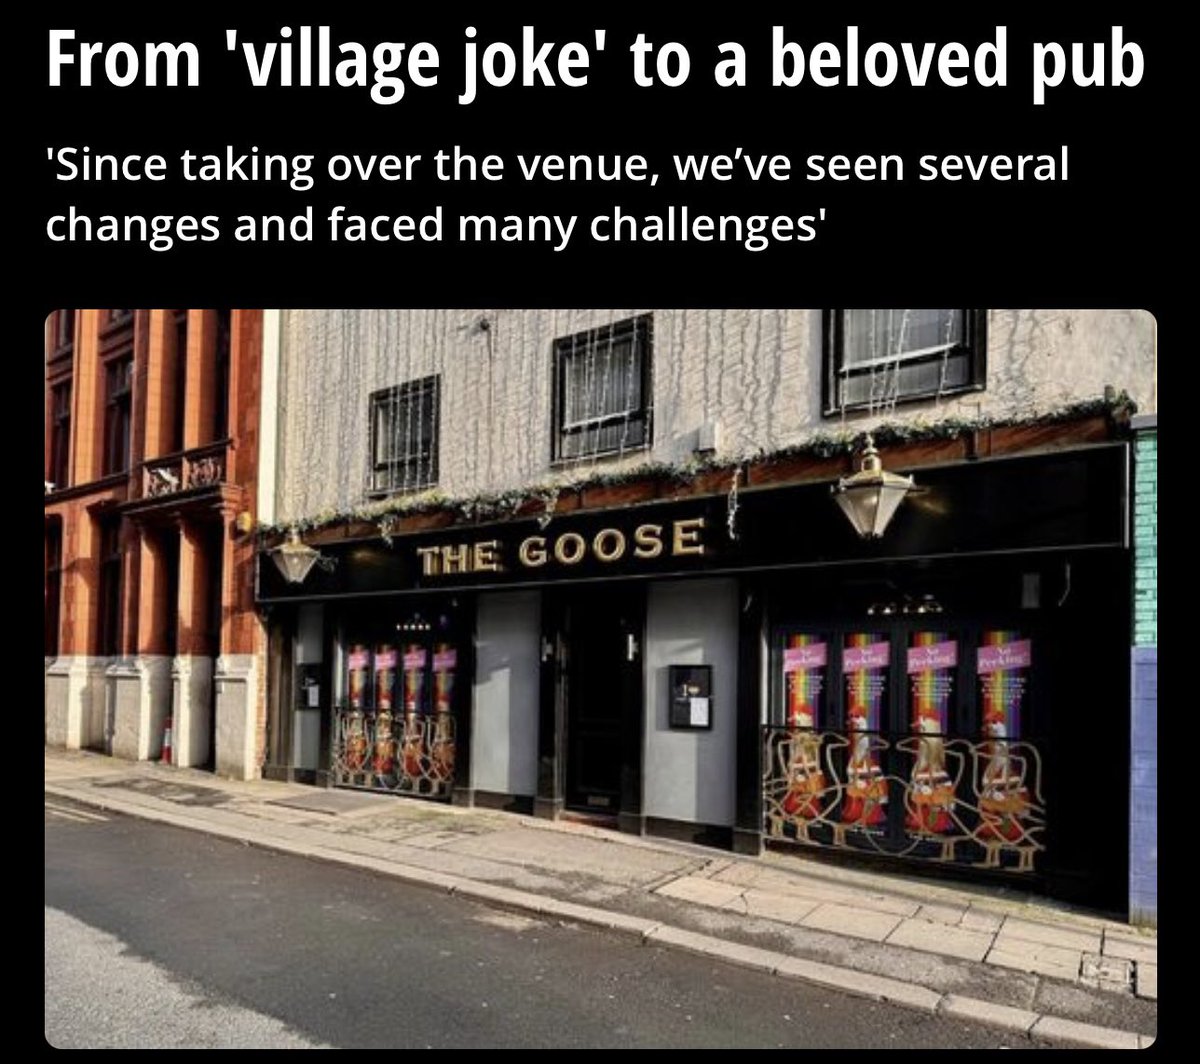 WE HAVE MADE THE HEADLINES! 📰 Even the MEN are excited about our new refurb 🥰 From ‘village joke’ to a beloved pub manchestereveningnews.co.uk/whats-on/villa… #thegoose #bloomstreet #manchester #gayvillagemanchester #lgbt #lgbtq #refurbishment